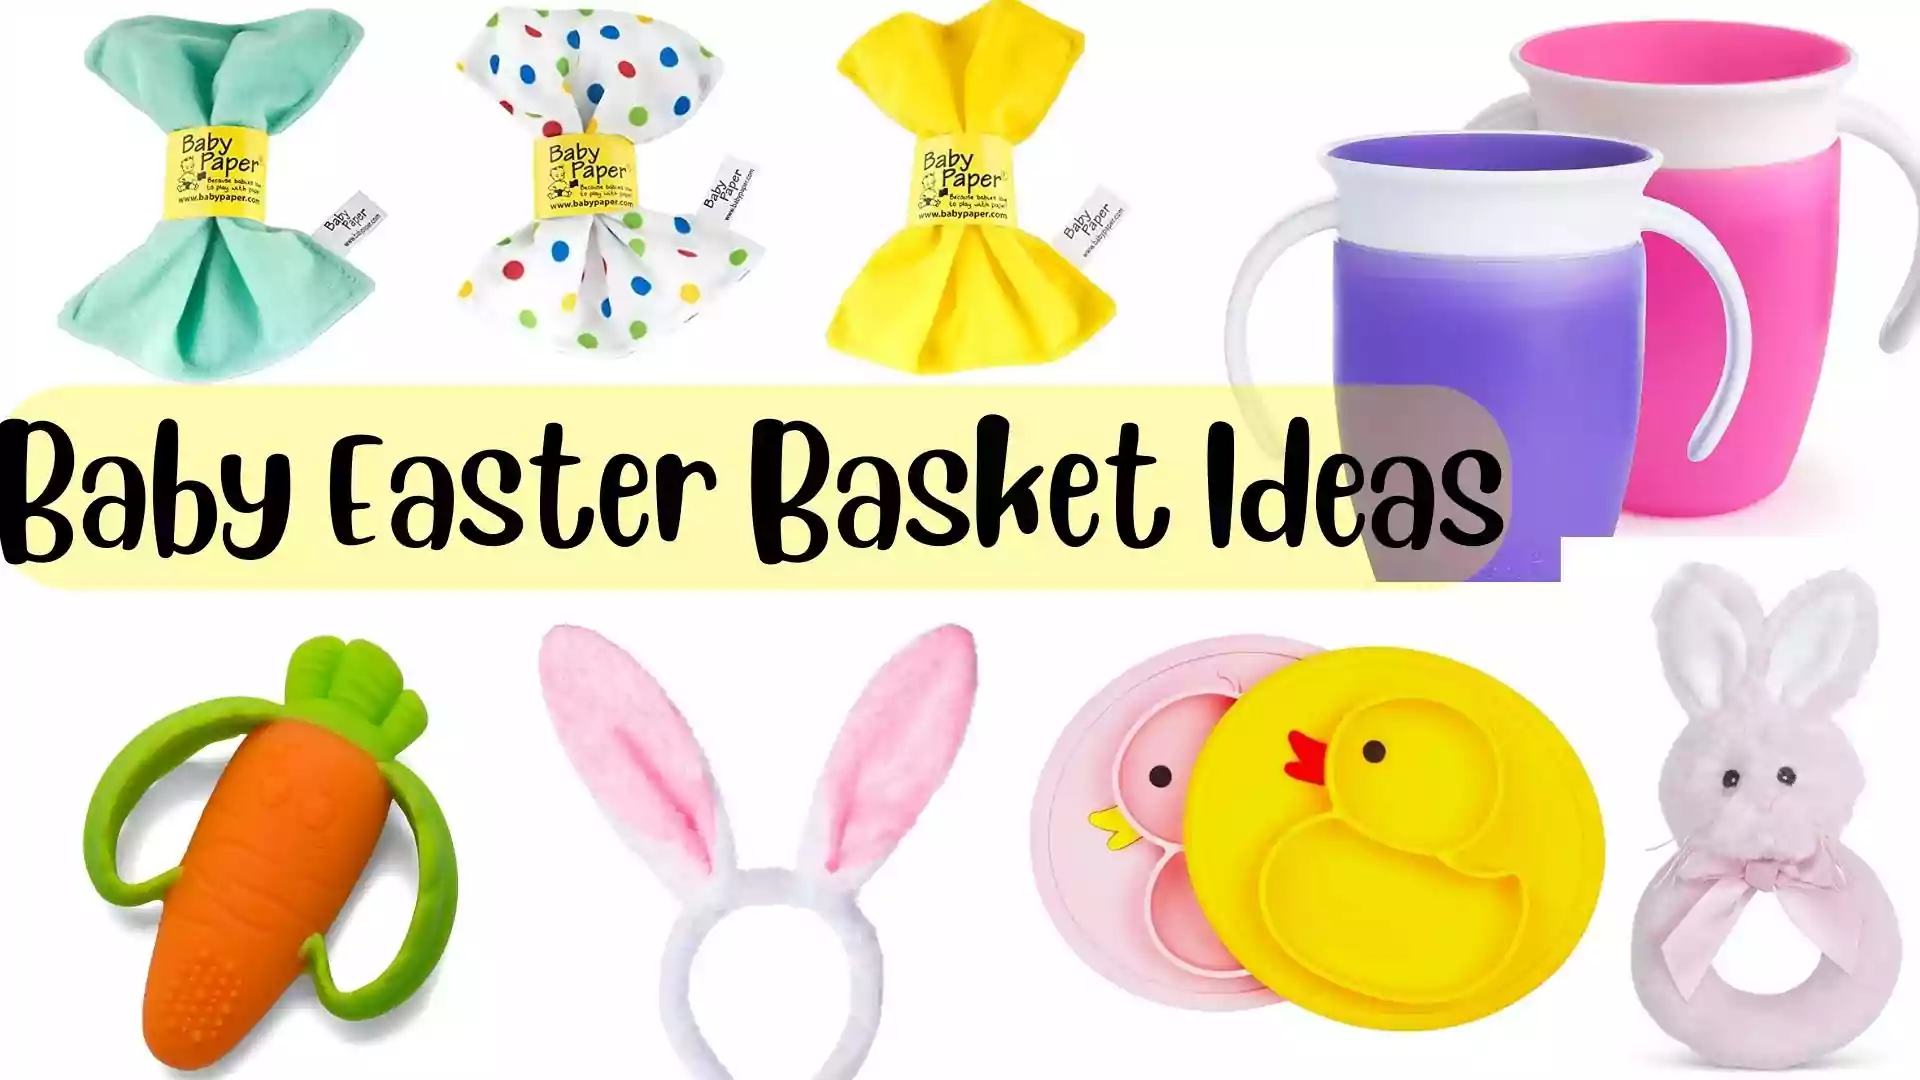 Baby Easter Basket wallpaper and images | Easter 2022